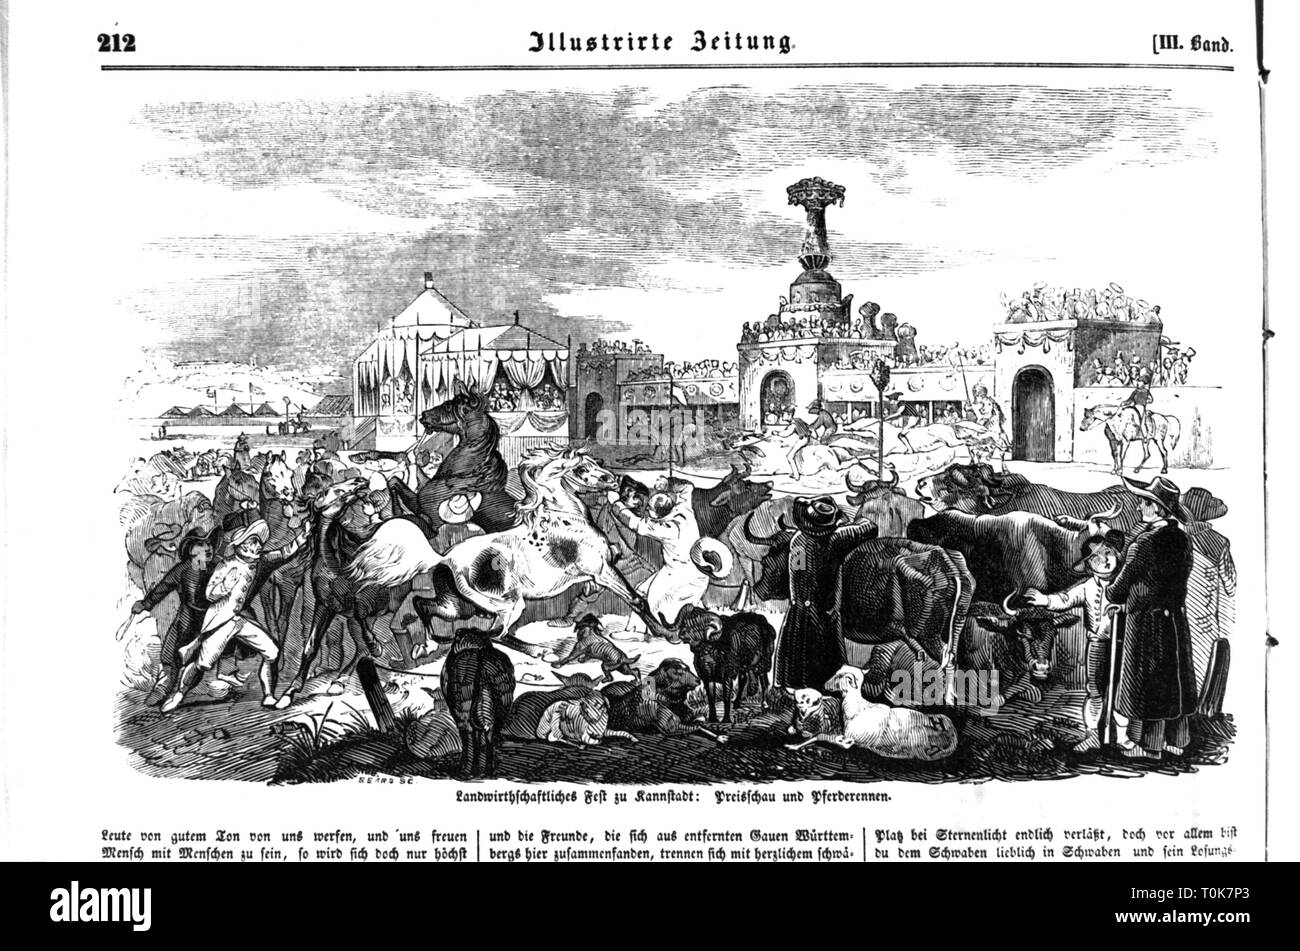 festivities, public festival, agricultural festival at Kannstadt, awards show and horse race, wood engraving, from: 'Illustrirte Zeitung', Leipzig, 19th century, 19th century, graphic, graphics, Germany, Wuerttemberg, Wurttemberg, Württemberg, Stuttgart, Bad Cannstatt, Canstatter Wasen, agriculture, farming, stand, stands, spectator, spectators, contest, contests, competition, competitions, race, races, animal, animals, horse, horses, presentation of prizes, prize-giving, award, awards, animal breeding, livestock breeding, stock breeding, cattle,, Additional-Rights-Clearance-Info-Not-Available Stock Photo